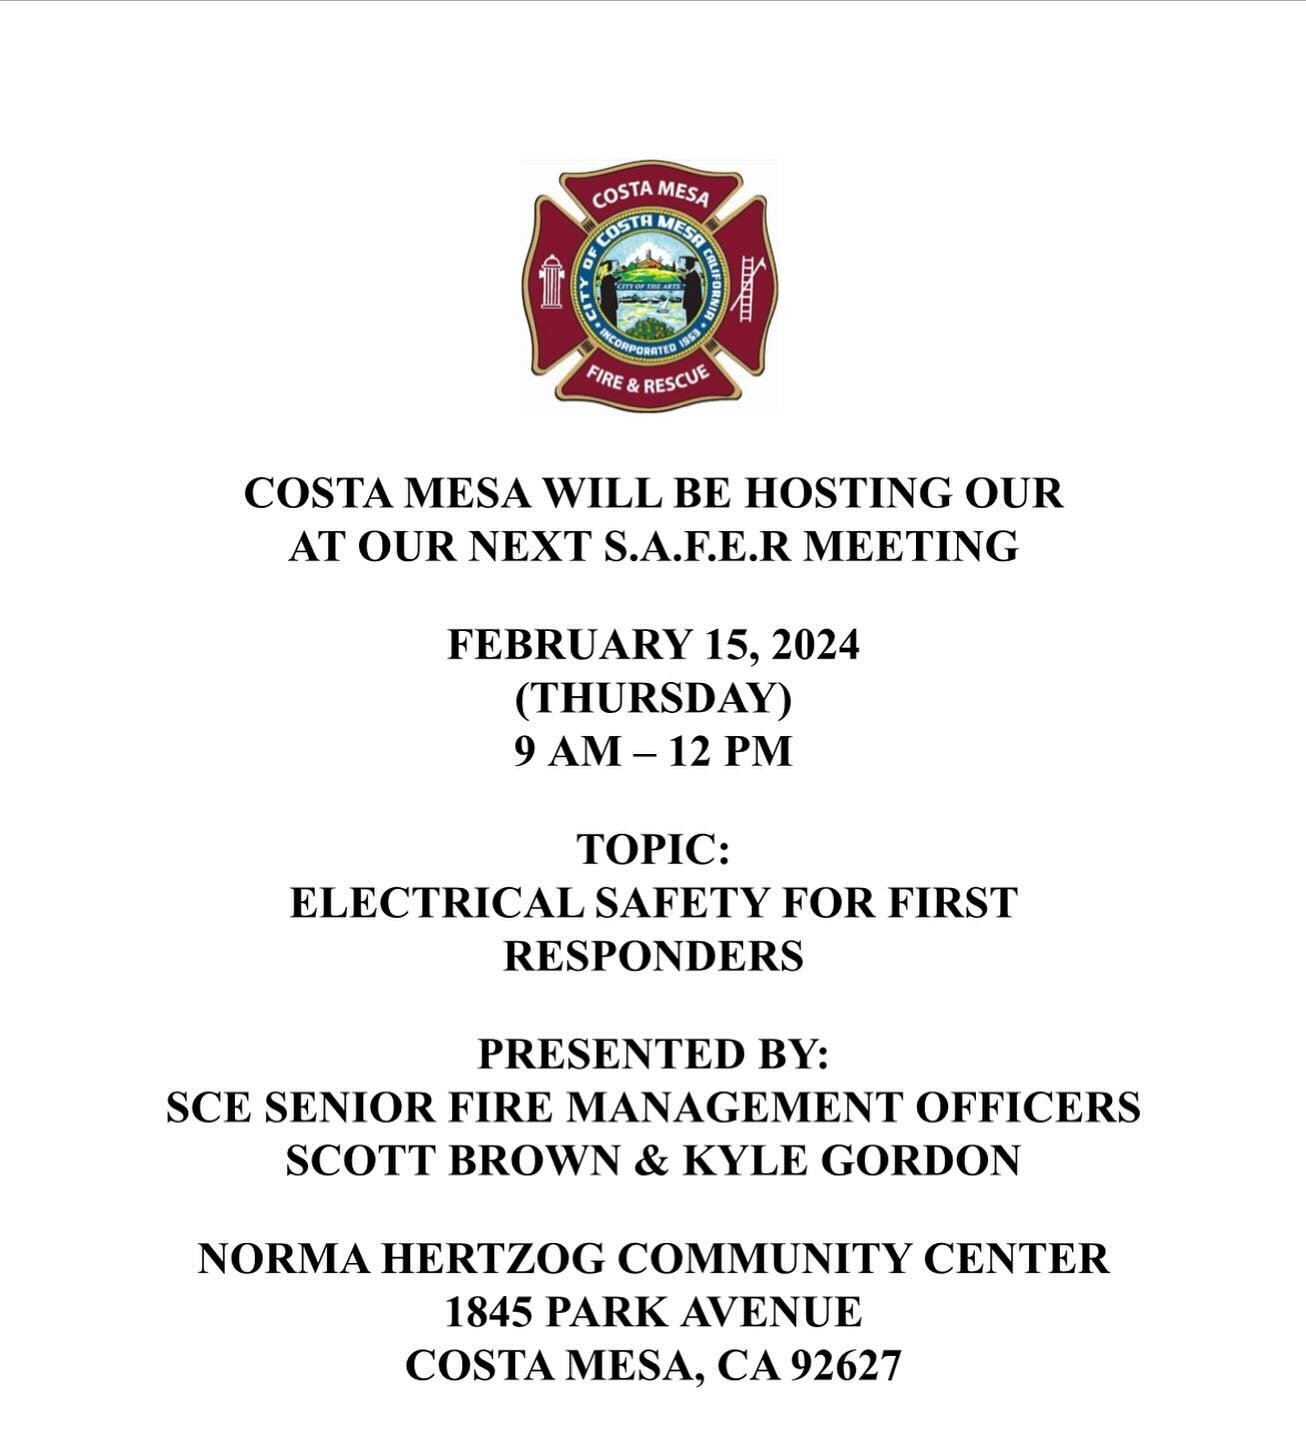 Please join us at our February S.A.F.E.R. Meeting. Thursday 2/15/24 9am - 12pm @costamesafirerescue